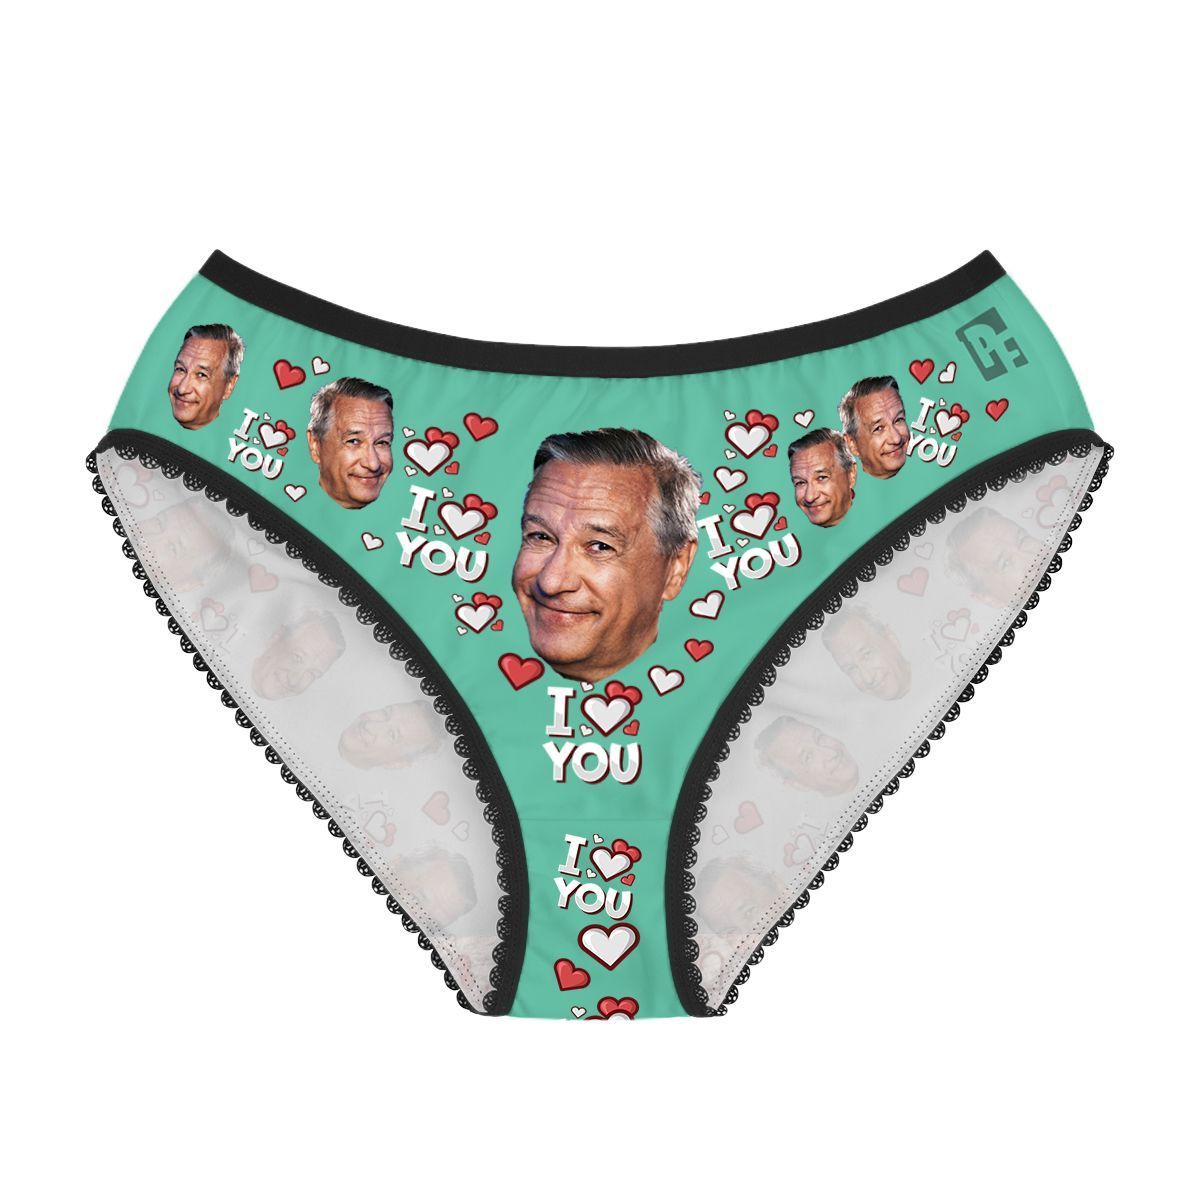 Mint I love you women's underwear briefs personalized with photo printed on them